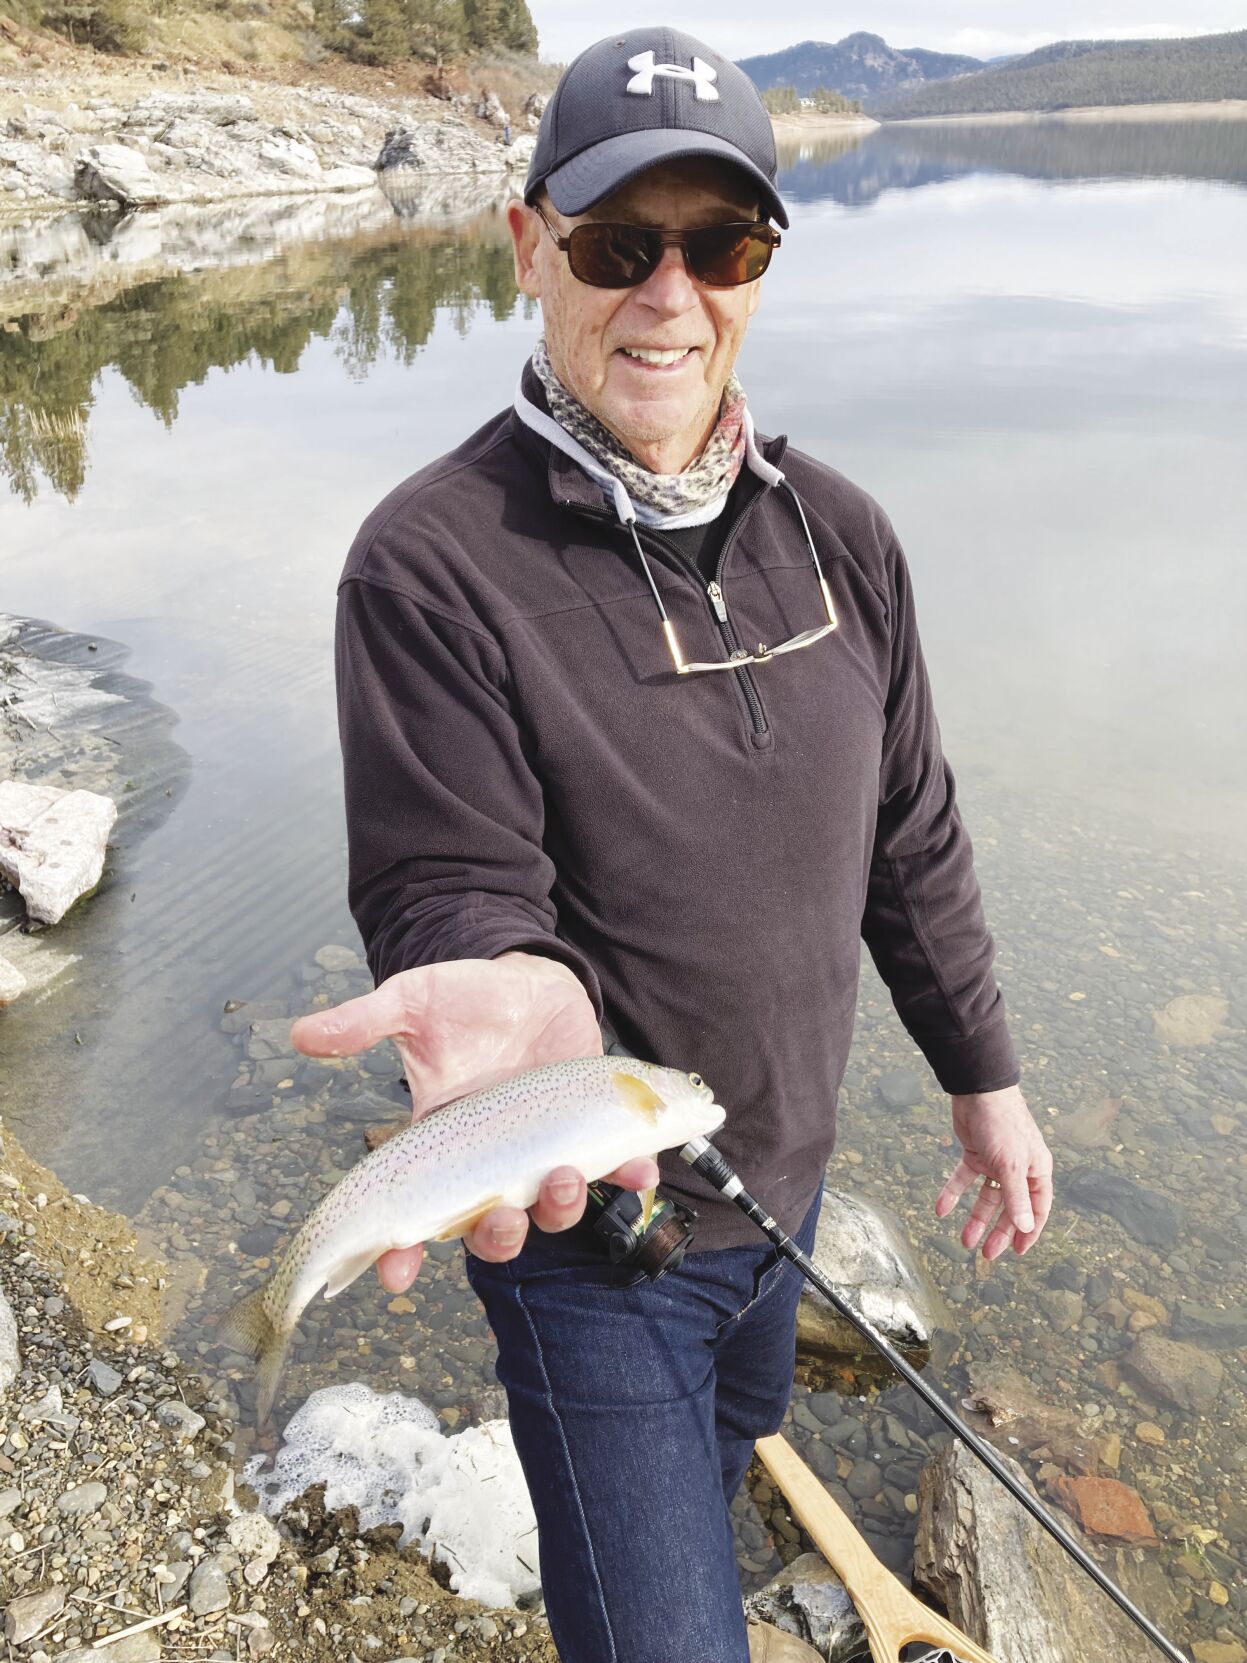 On the trail: Homemade concoctions can tempt trout | Outdoors